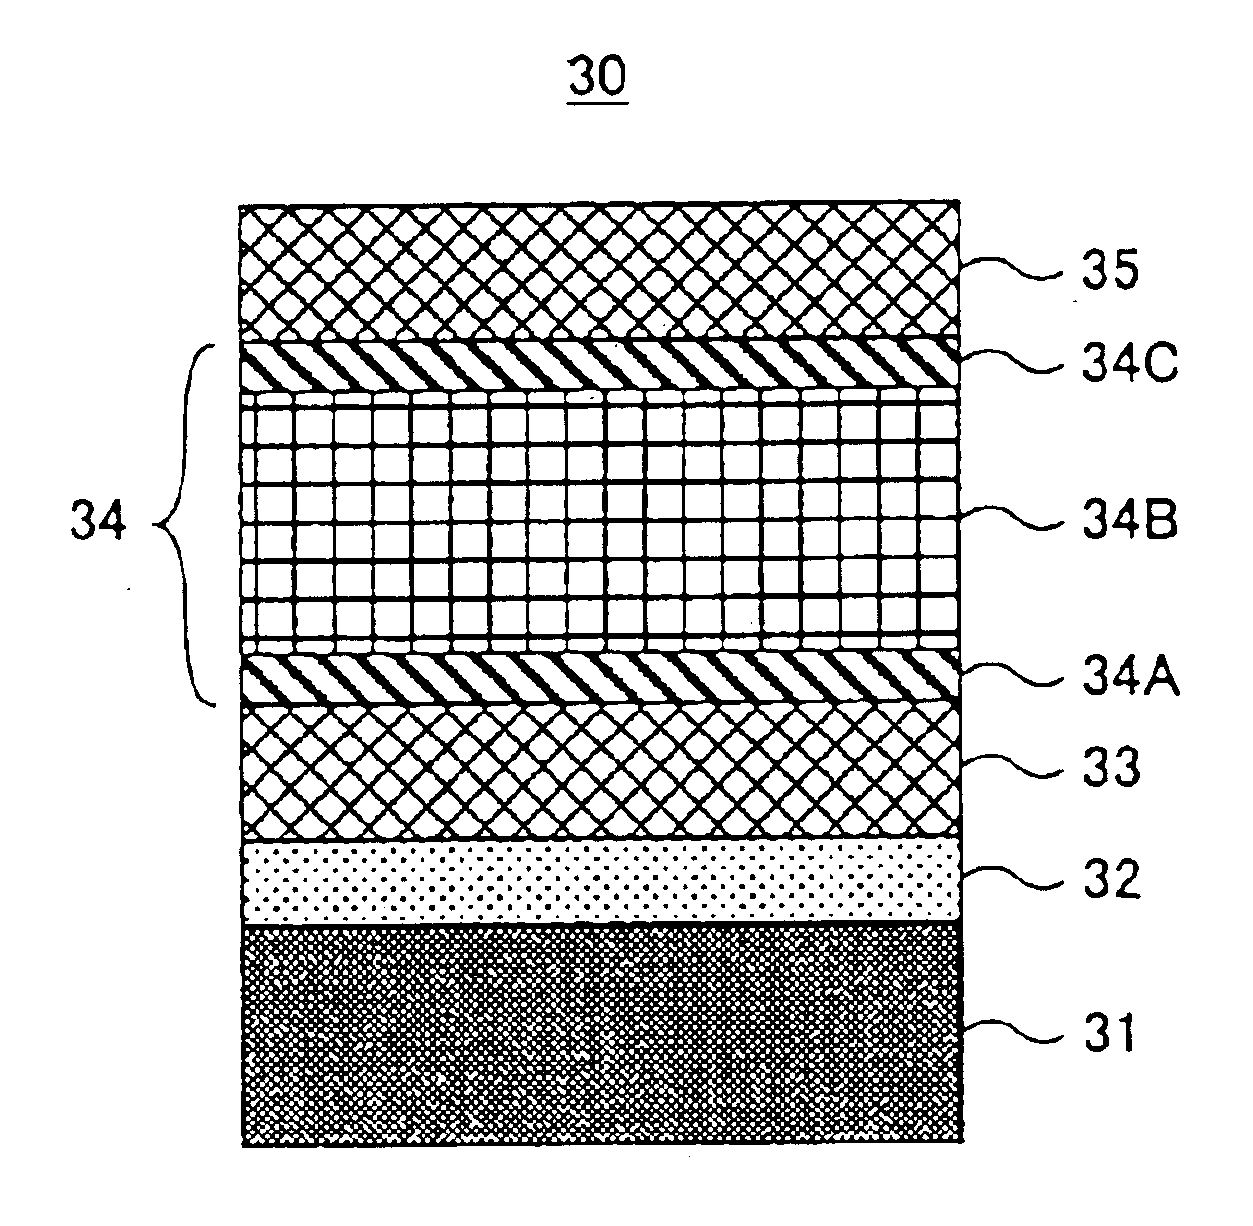 Ferroelectric capacitor and a semiconductor device